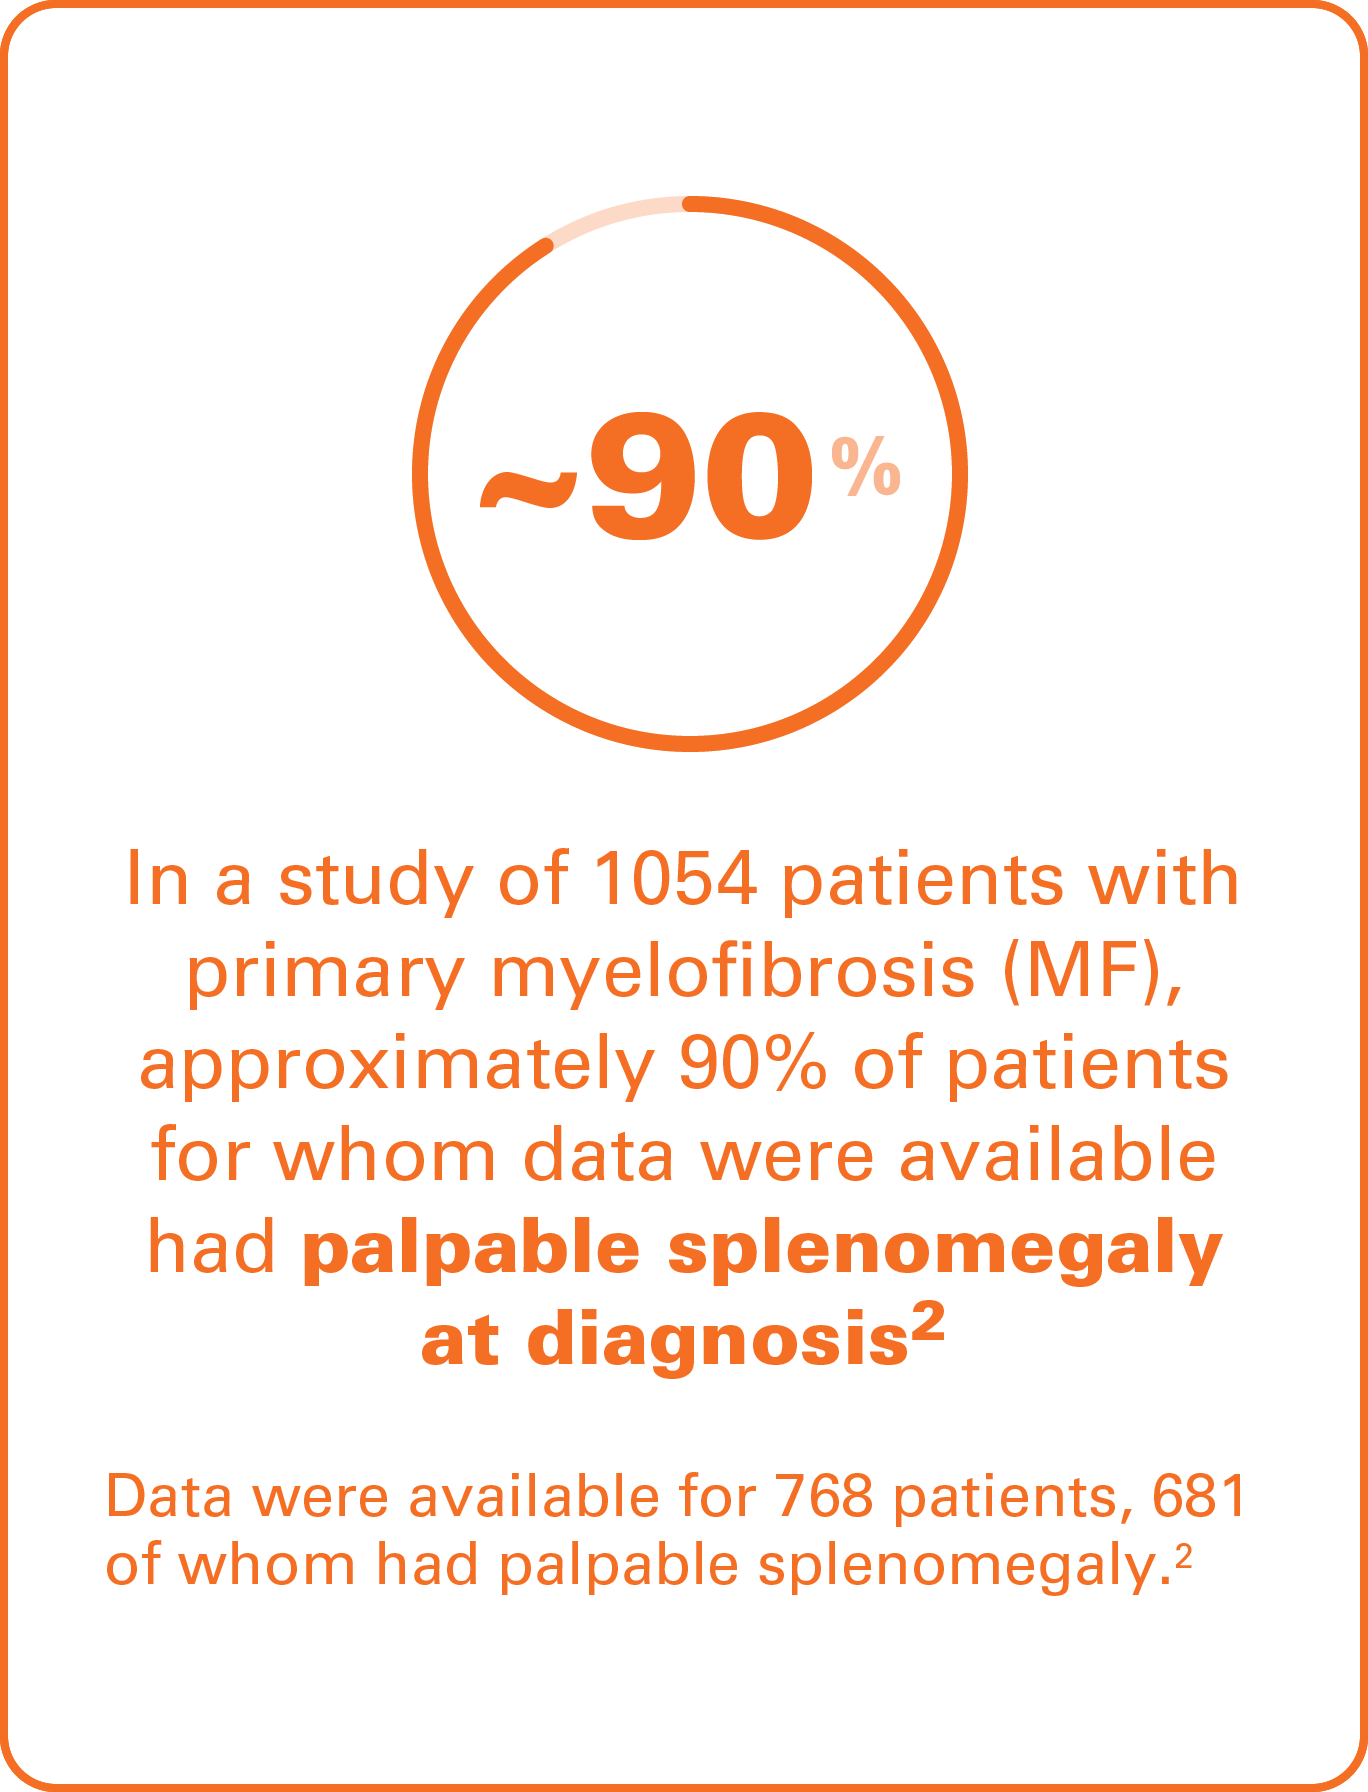 Image of text  that says In a study of 1054 patients with primary myelofibrosis (MF), approximately 90% (375/428) of patients for whom data were available had palpable splenomegaly at diagnosis. Data were available for 768 patients, 681 of whom had palpable splenomegaly.